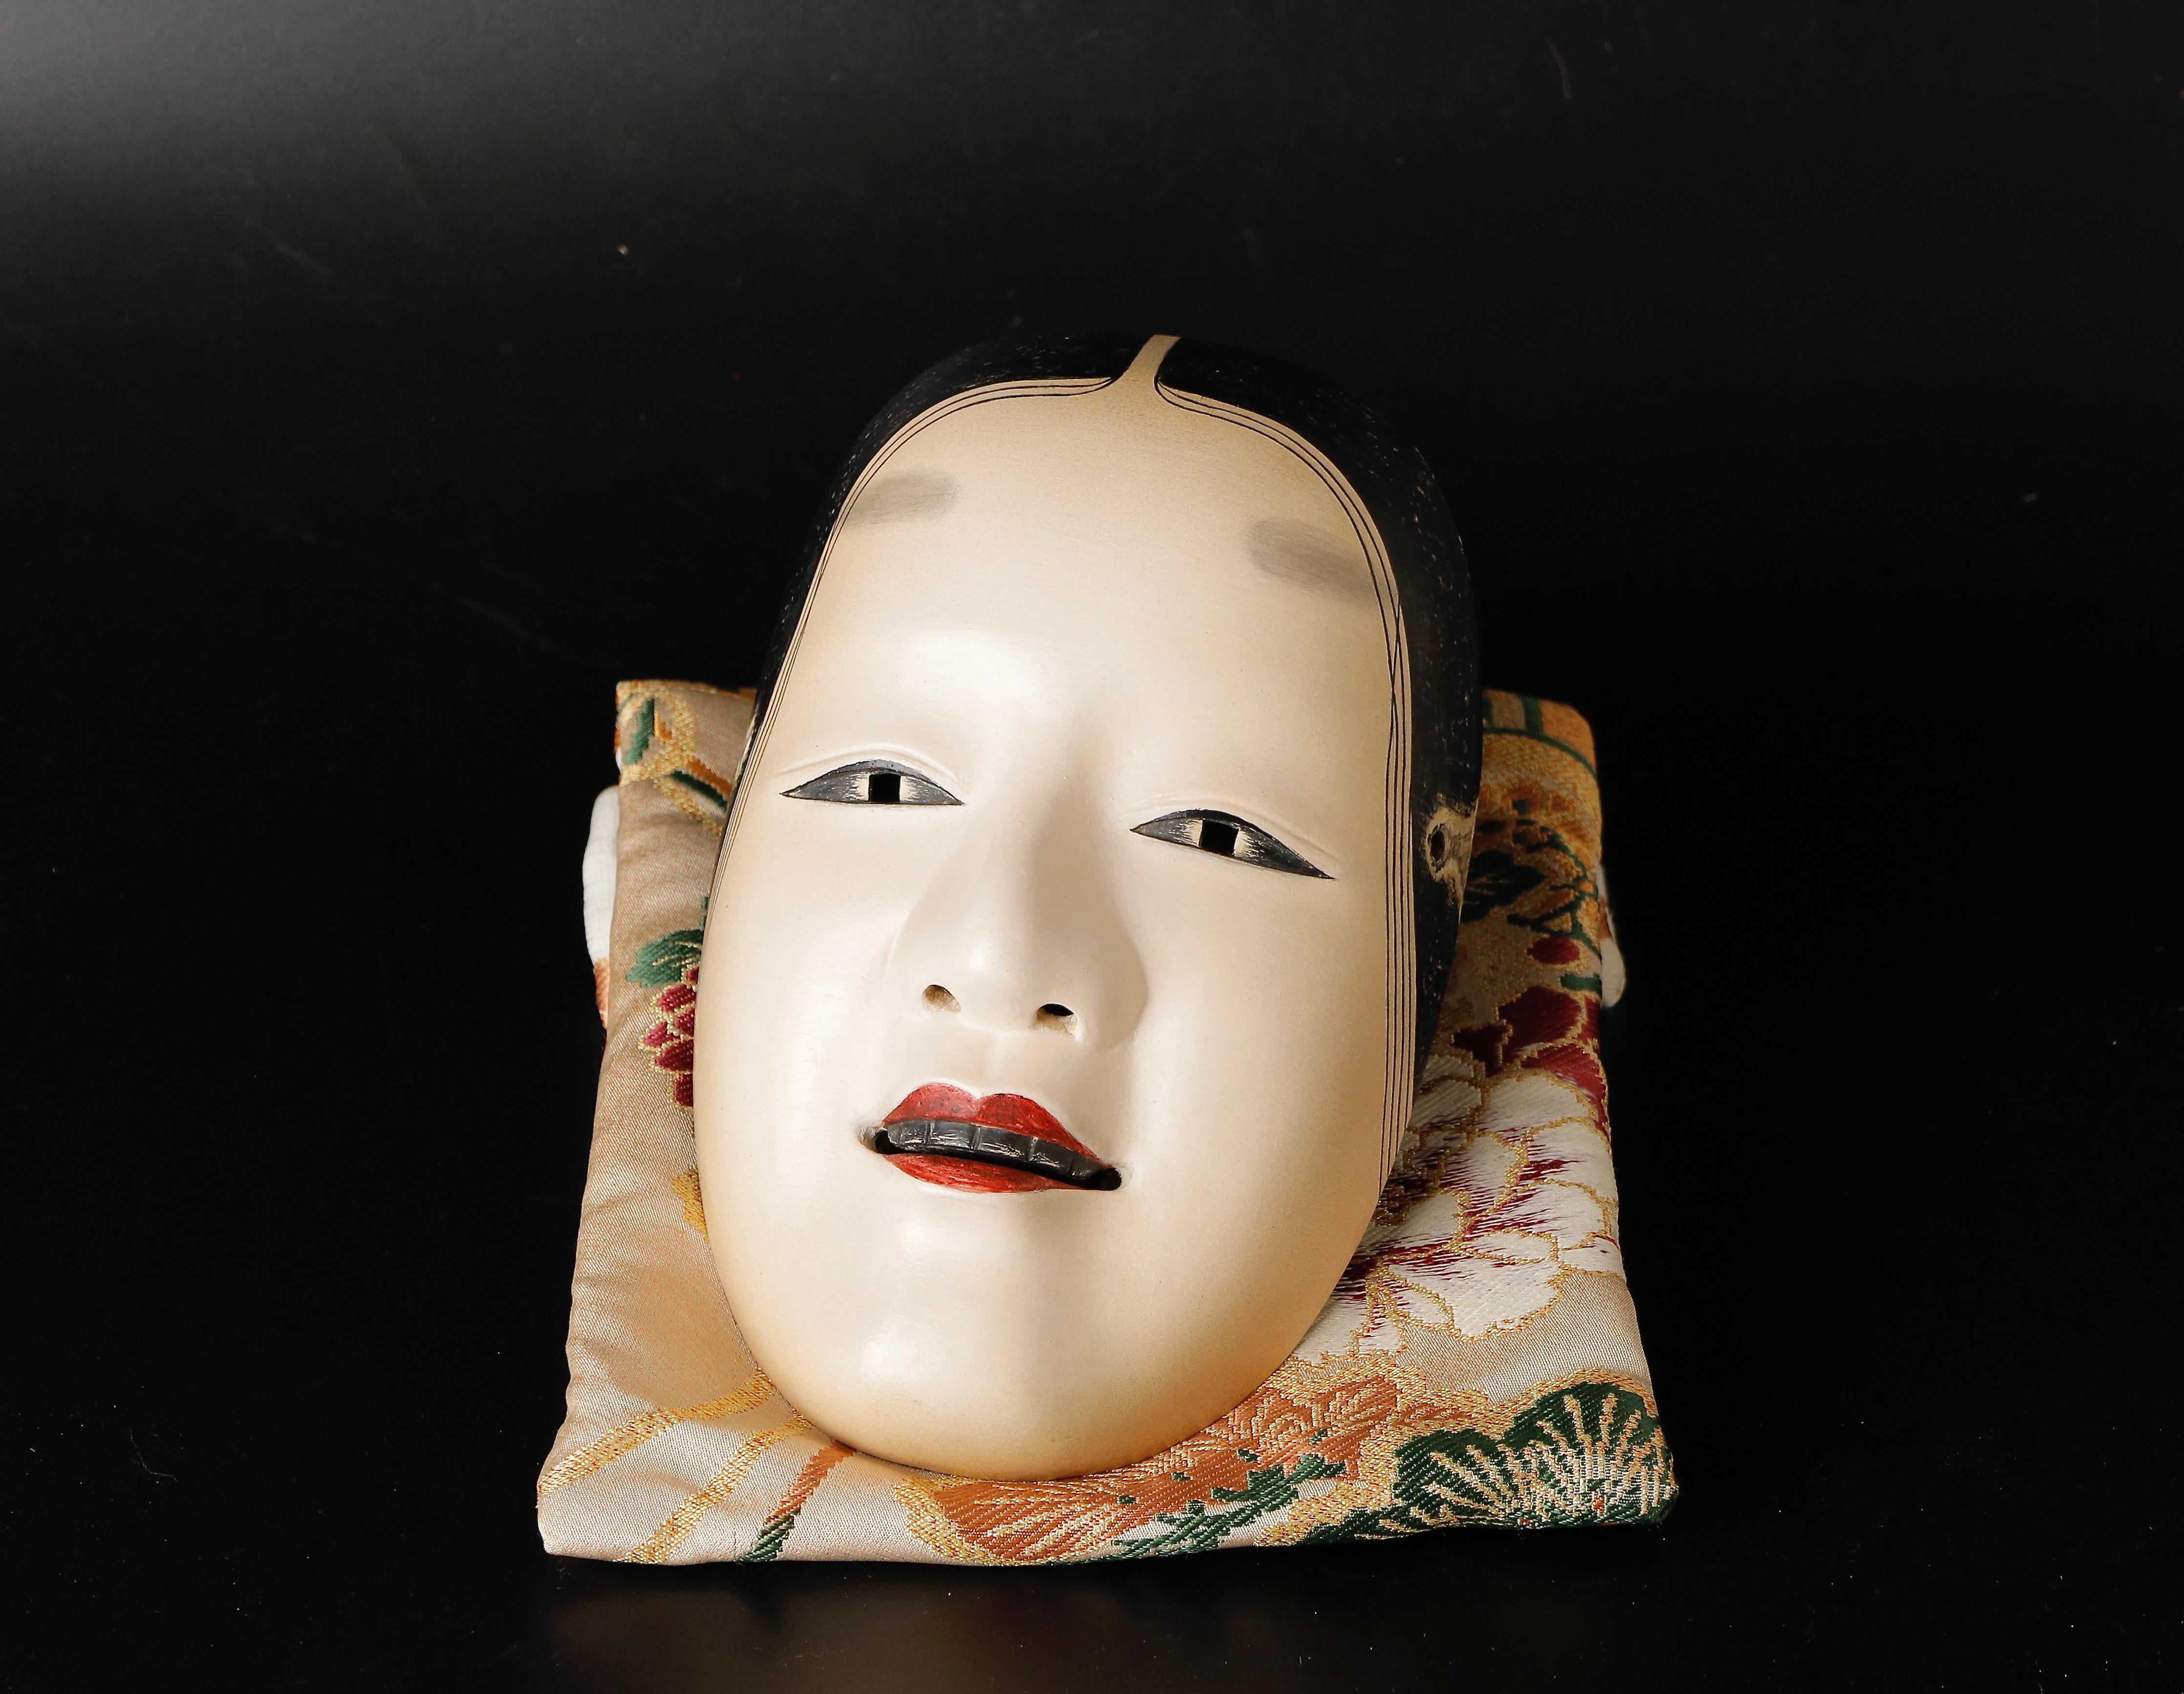 This exceptional Japanese Magojiro Noh mask is skillfully crafted using traditional techniques, and represents a calm and benevolent woman. The mask was created by the highly talented artist, Watanabe Shuji.

The Magojiro Noh Mask is a distinctive